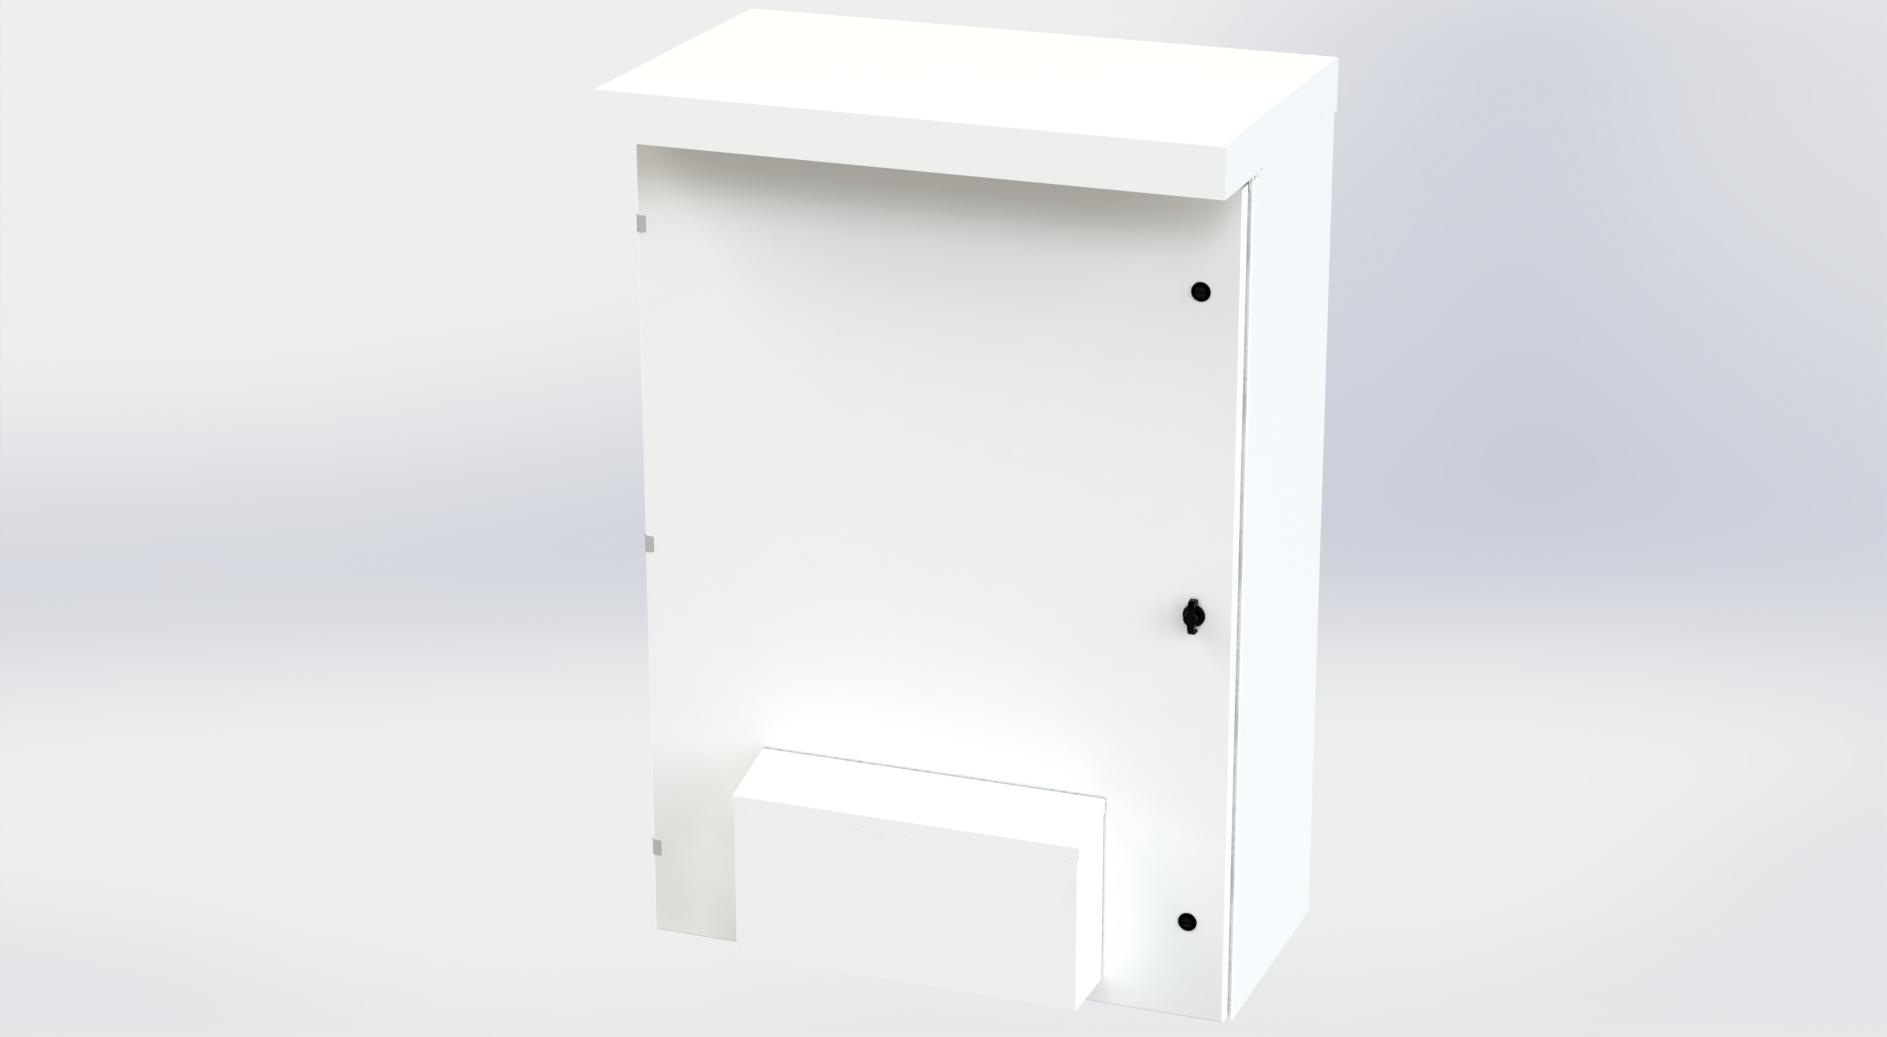 Saginaw Control SCE-53VR3616 Enclosure, Vented Type 3R, Height:53.00", Width:36.00", Depth:16.00", White powder coating inside and out. Optional sub-panels are powder coated white.